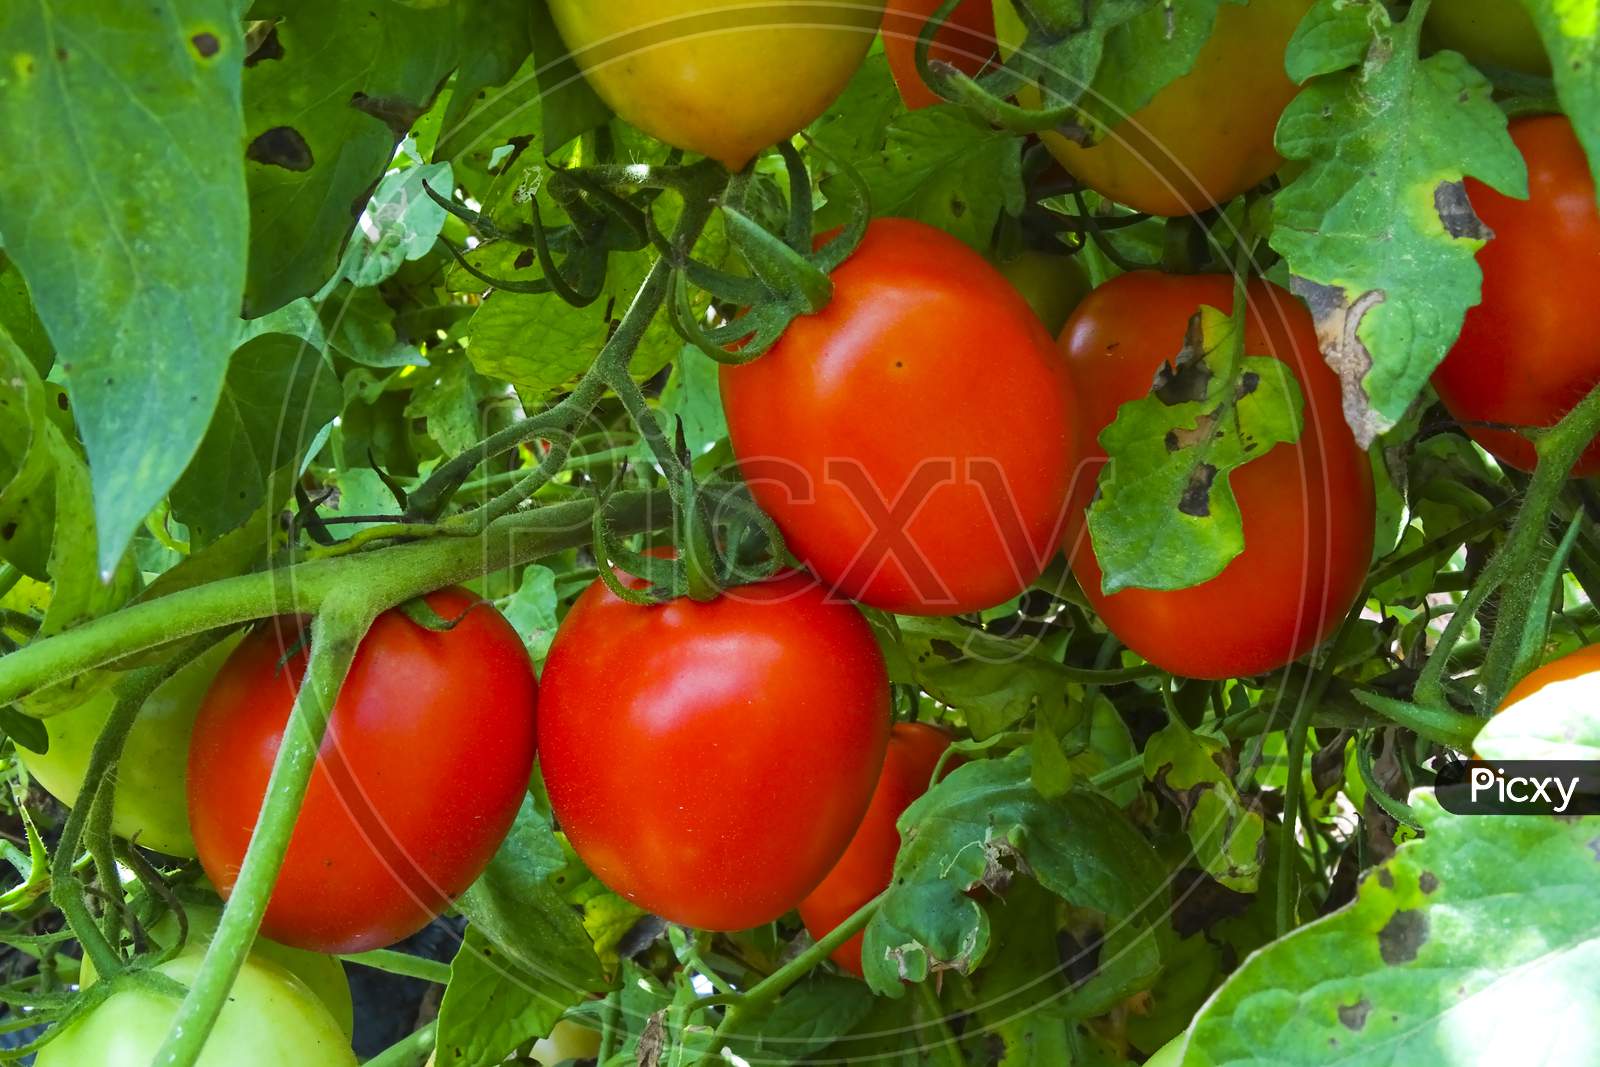 Ripe garden tomatoes ready for picking.